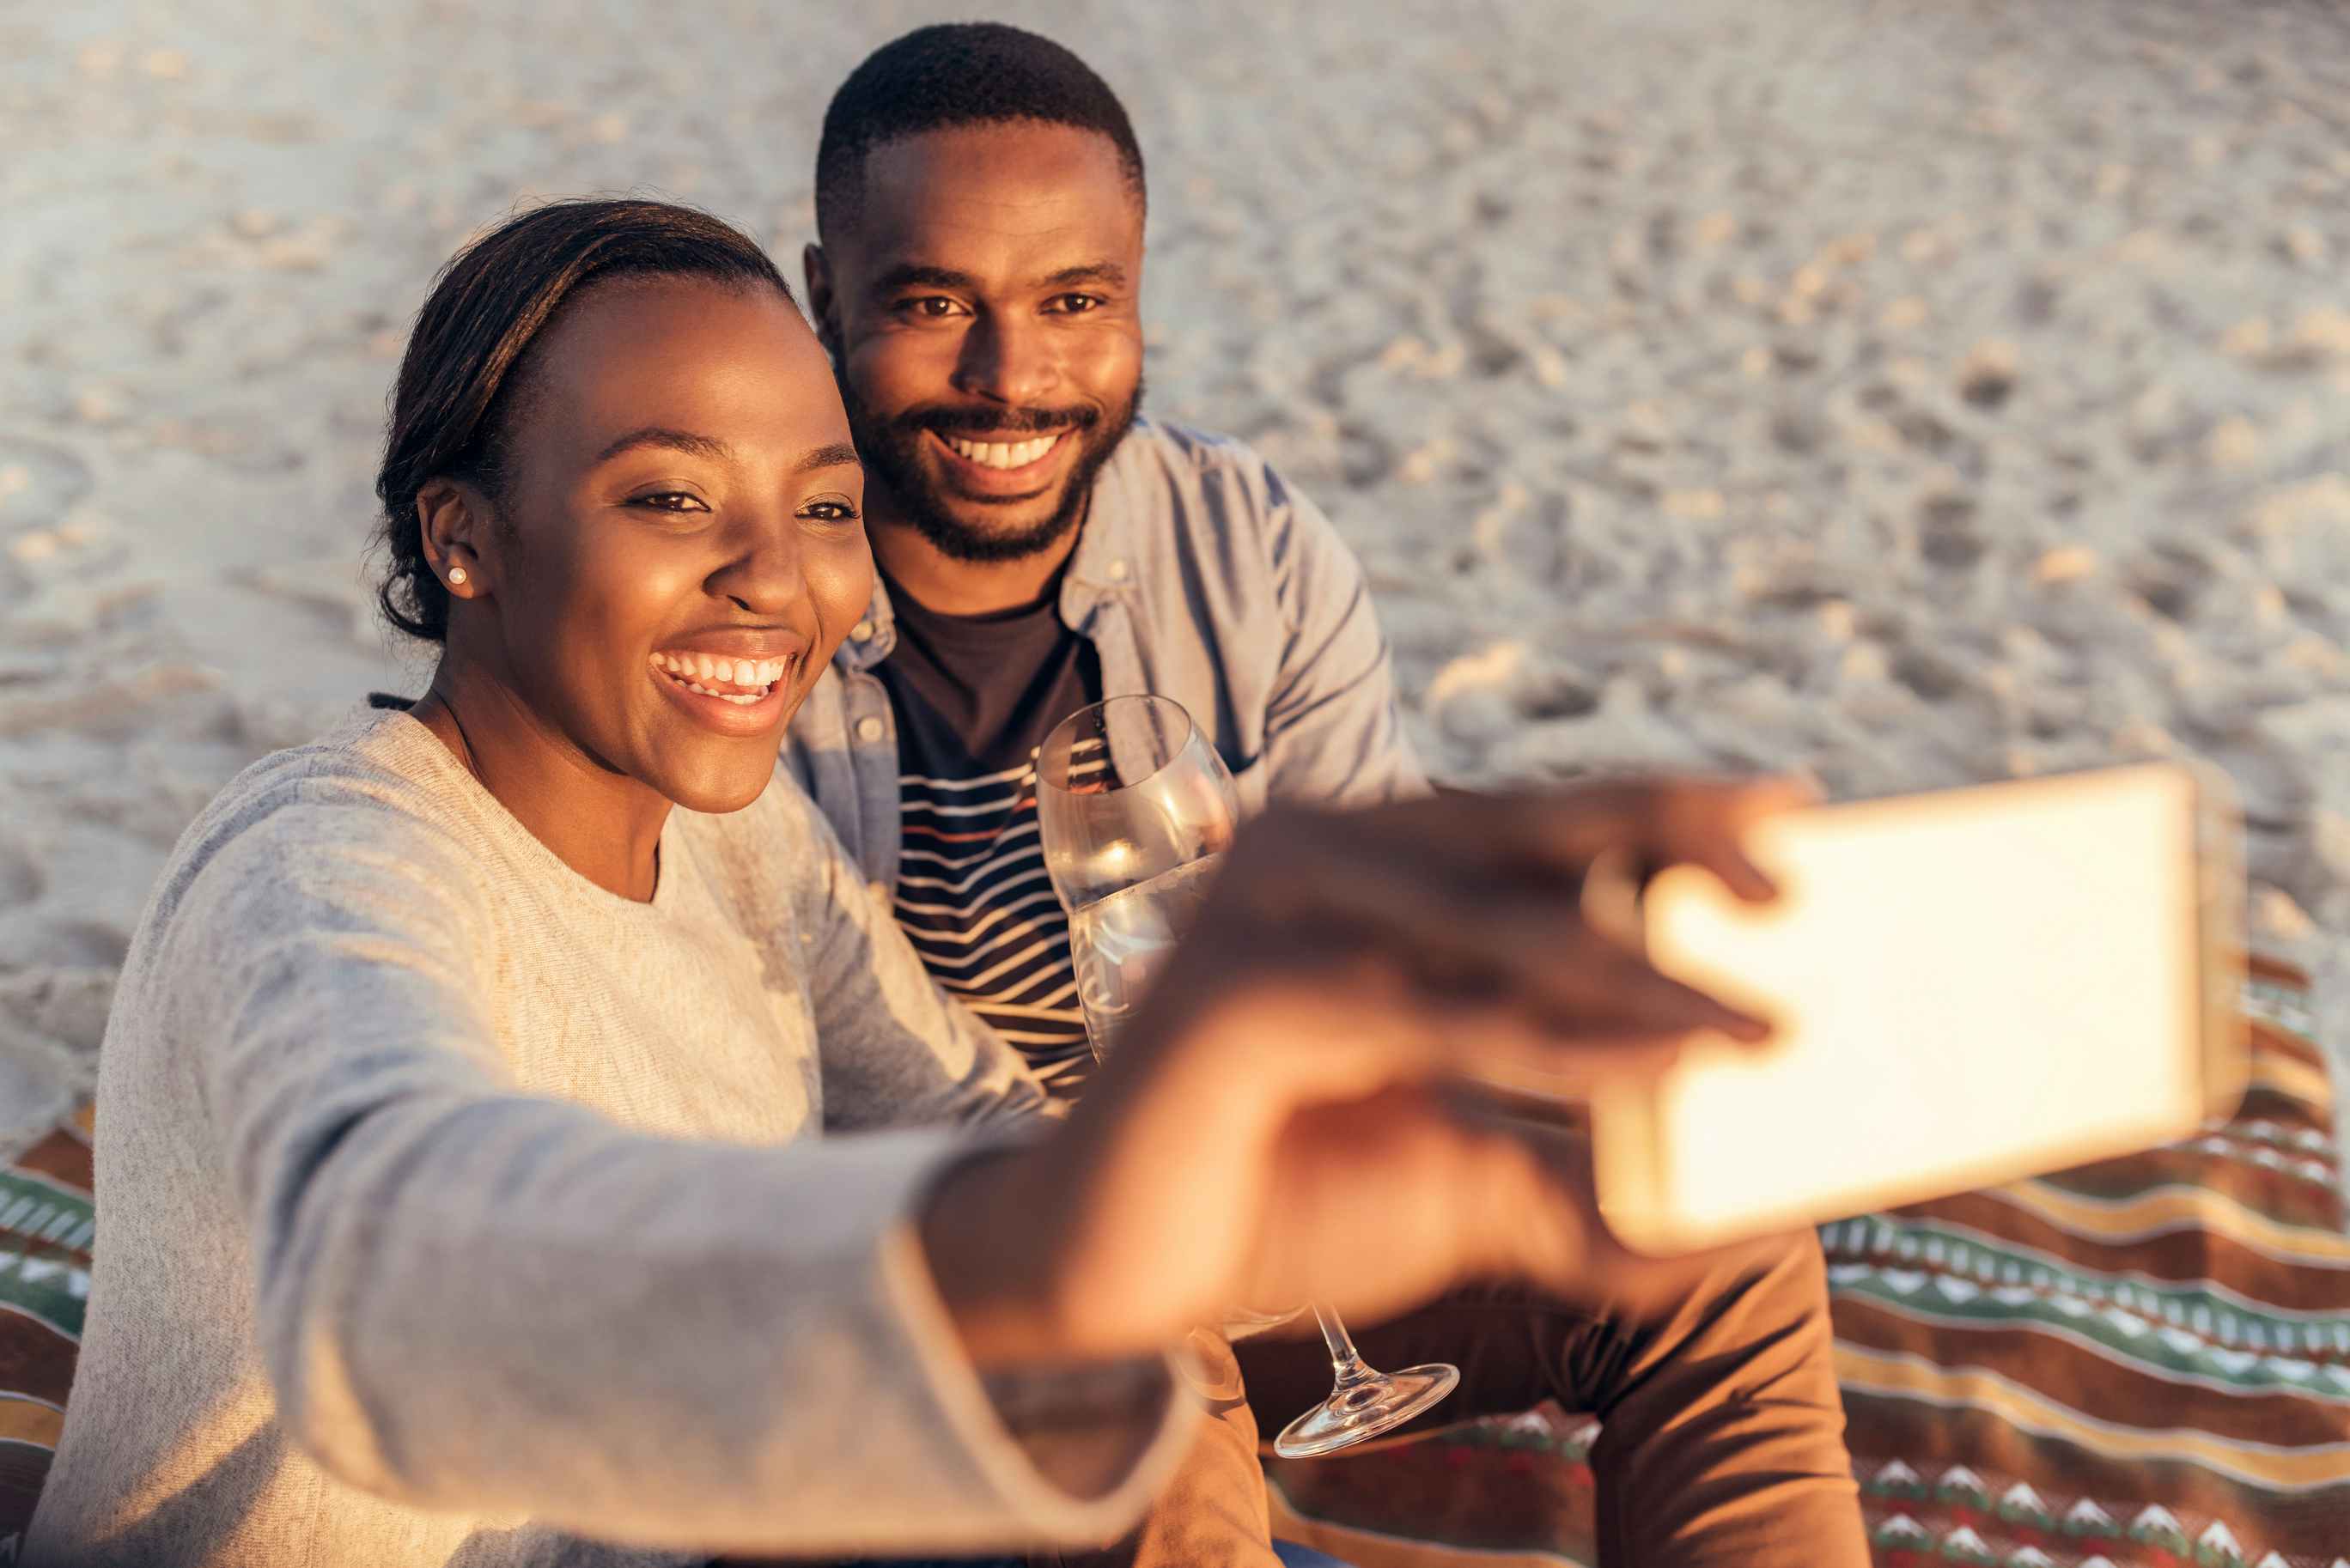 Two people sitting together on a blanket at the beach and taking a selfie